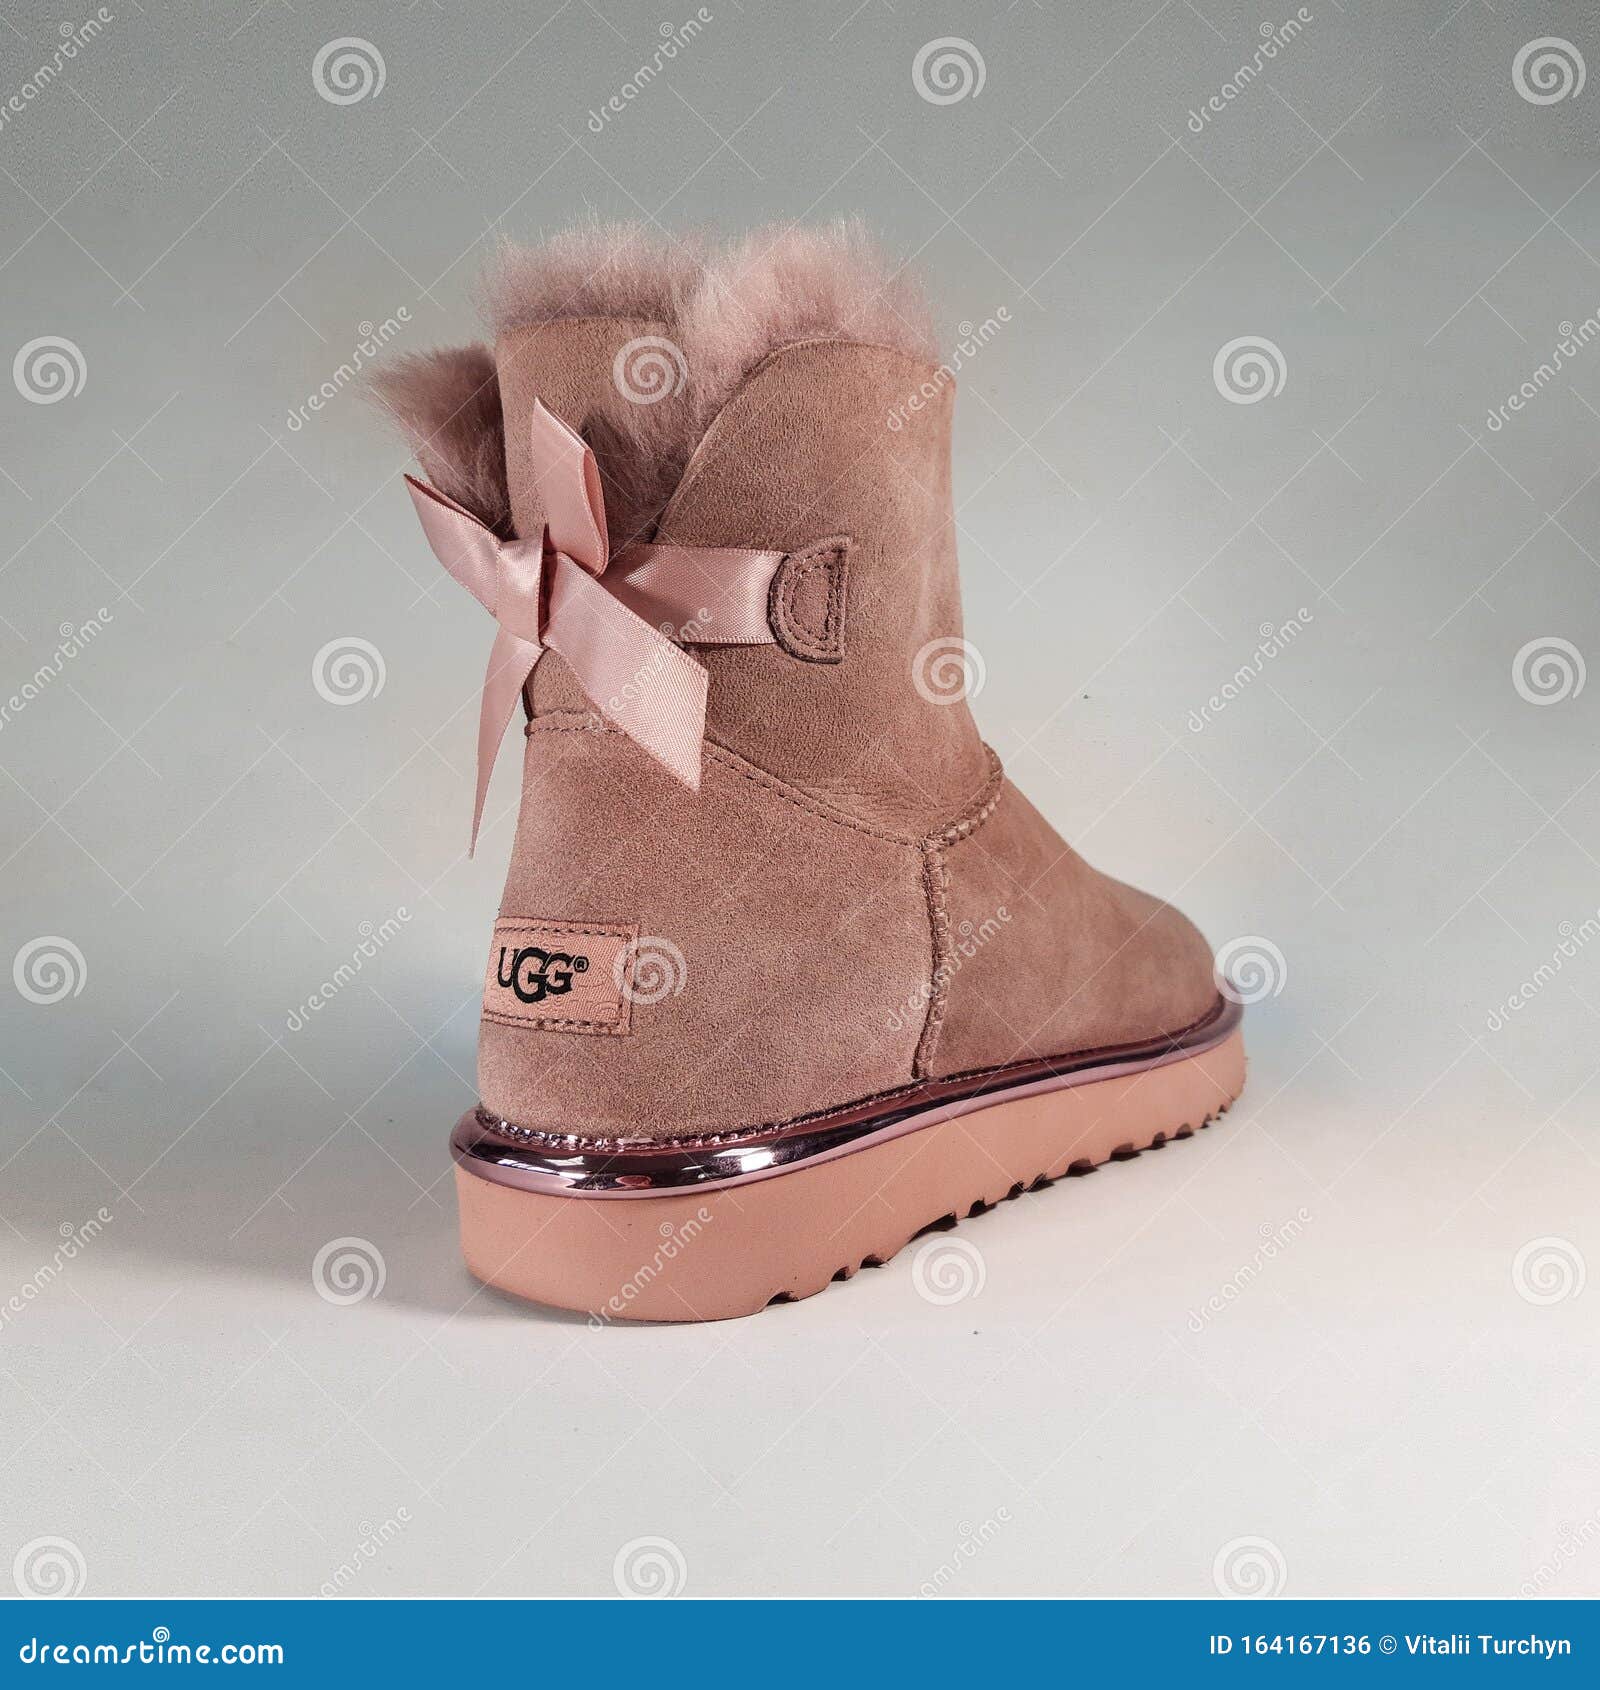 womens shoes with fur